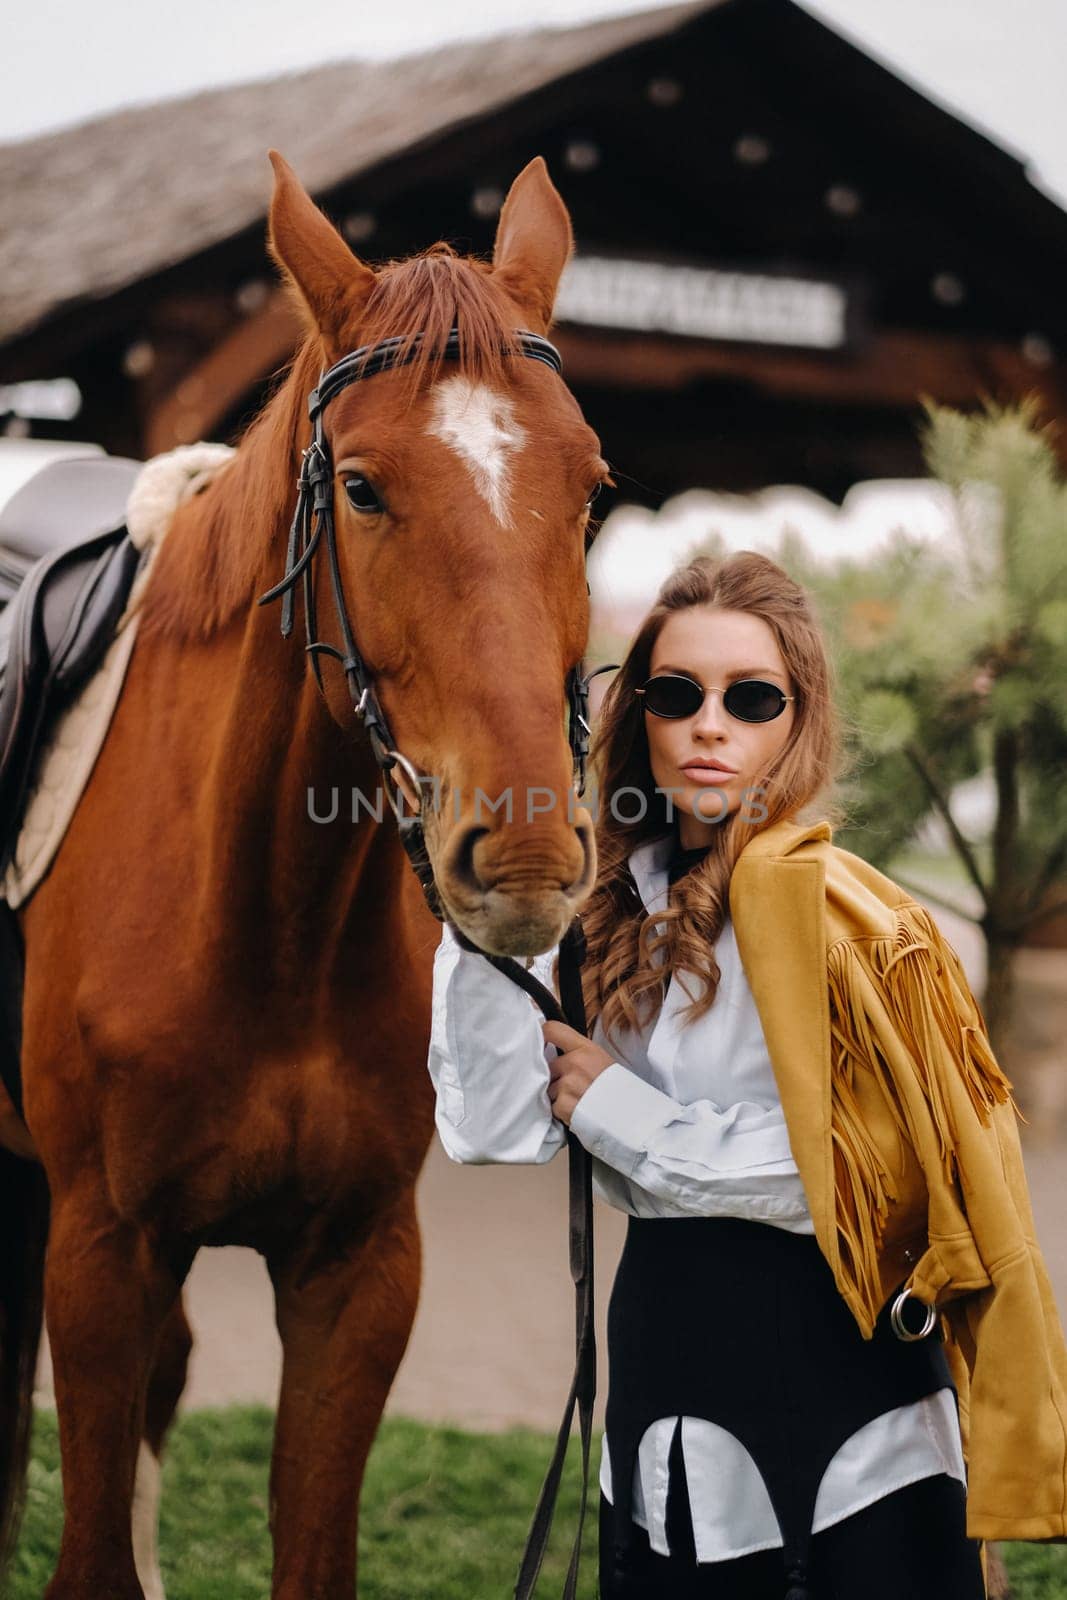 Stylish girl with glasses stands next to a horse on the street by Lobachad